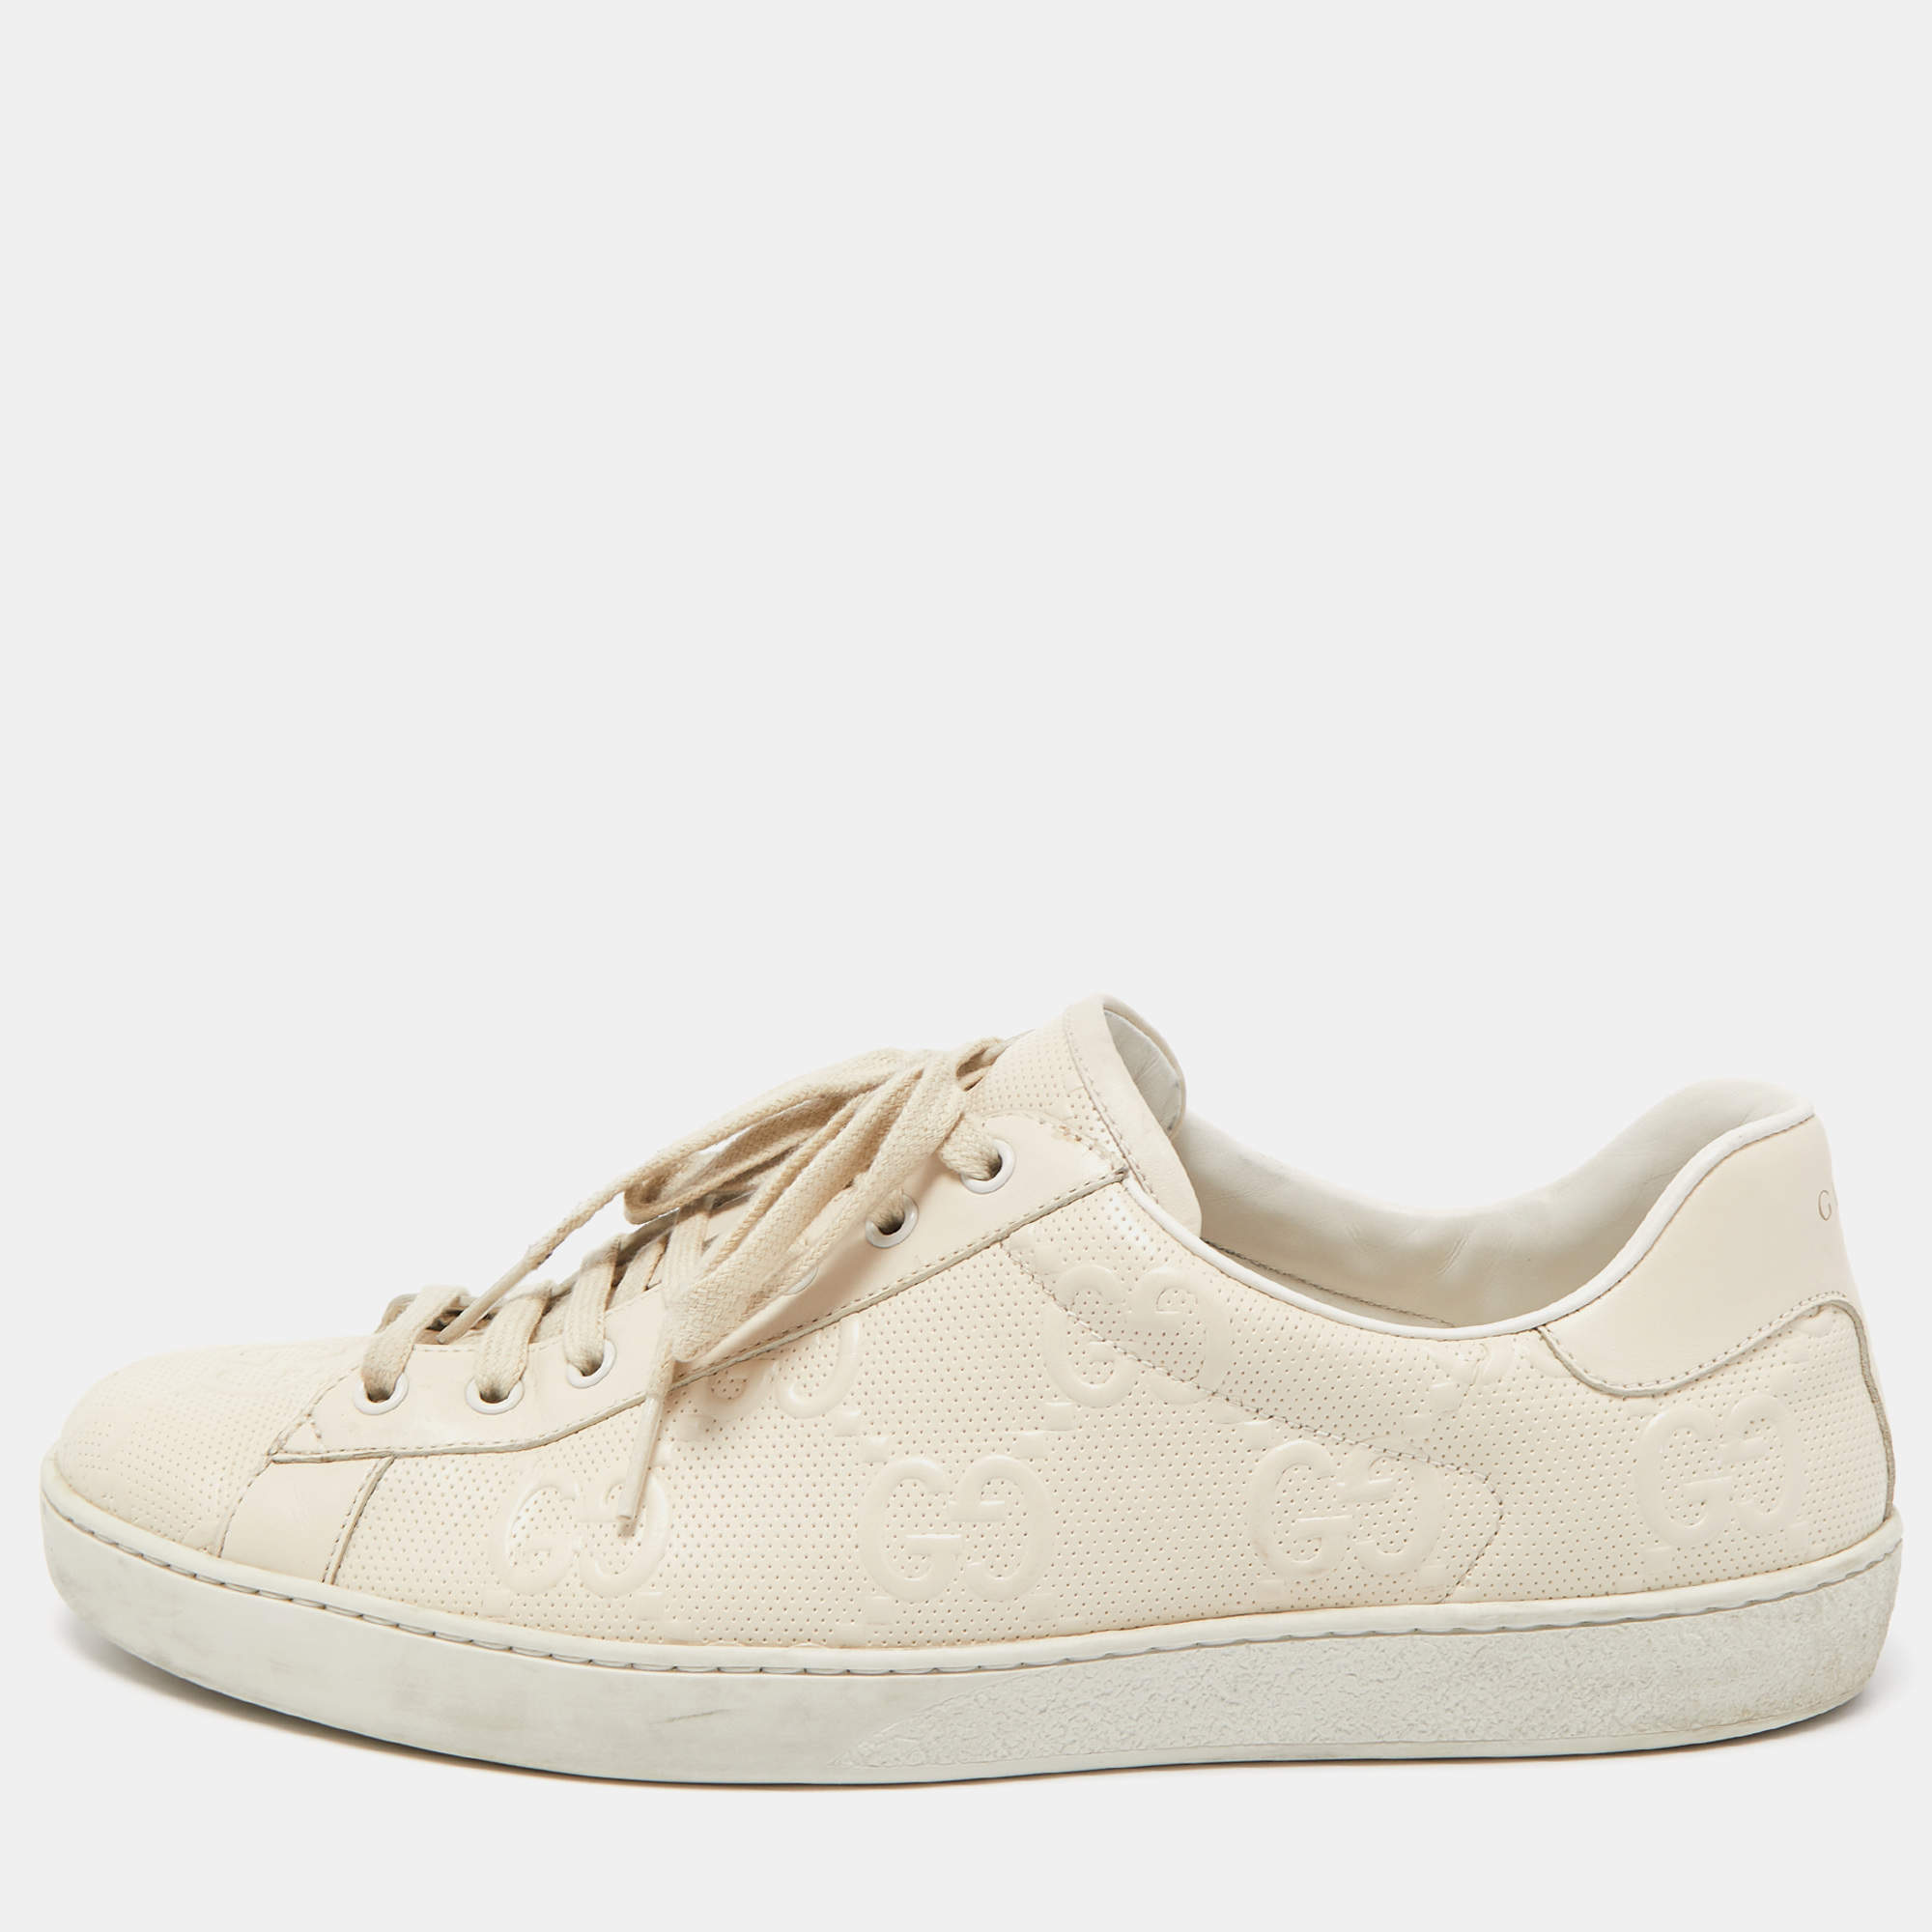 Betsy Trotwood Porto Fremragende Gucci Cream GG Embossed Perforated Leather Ace Sneakers Size 46 Gucci | TLC